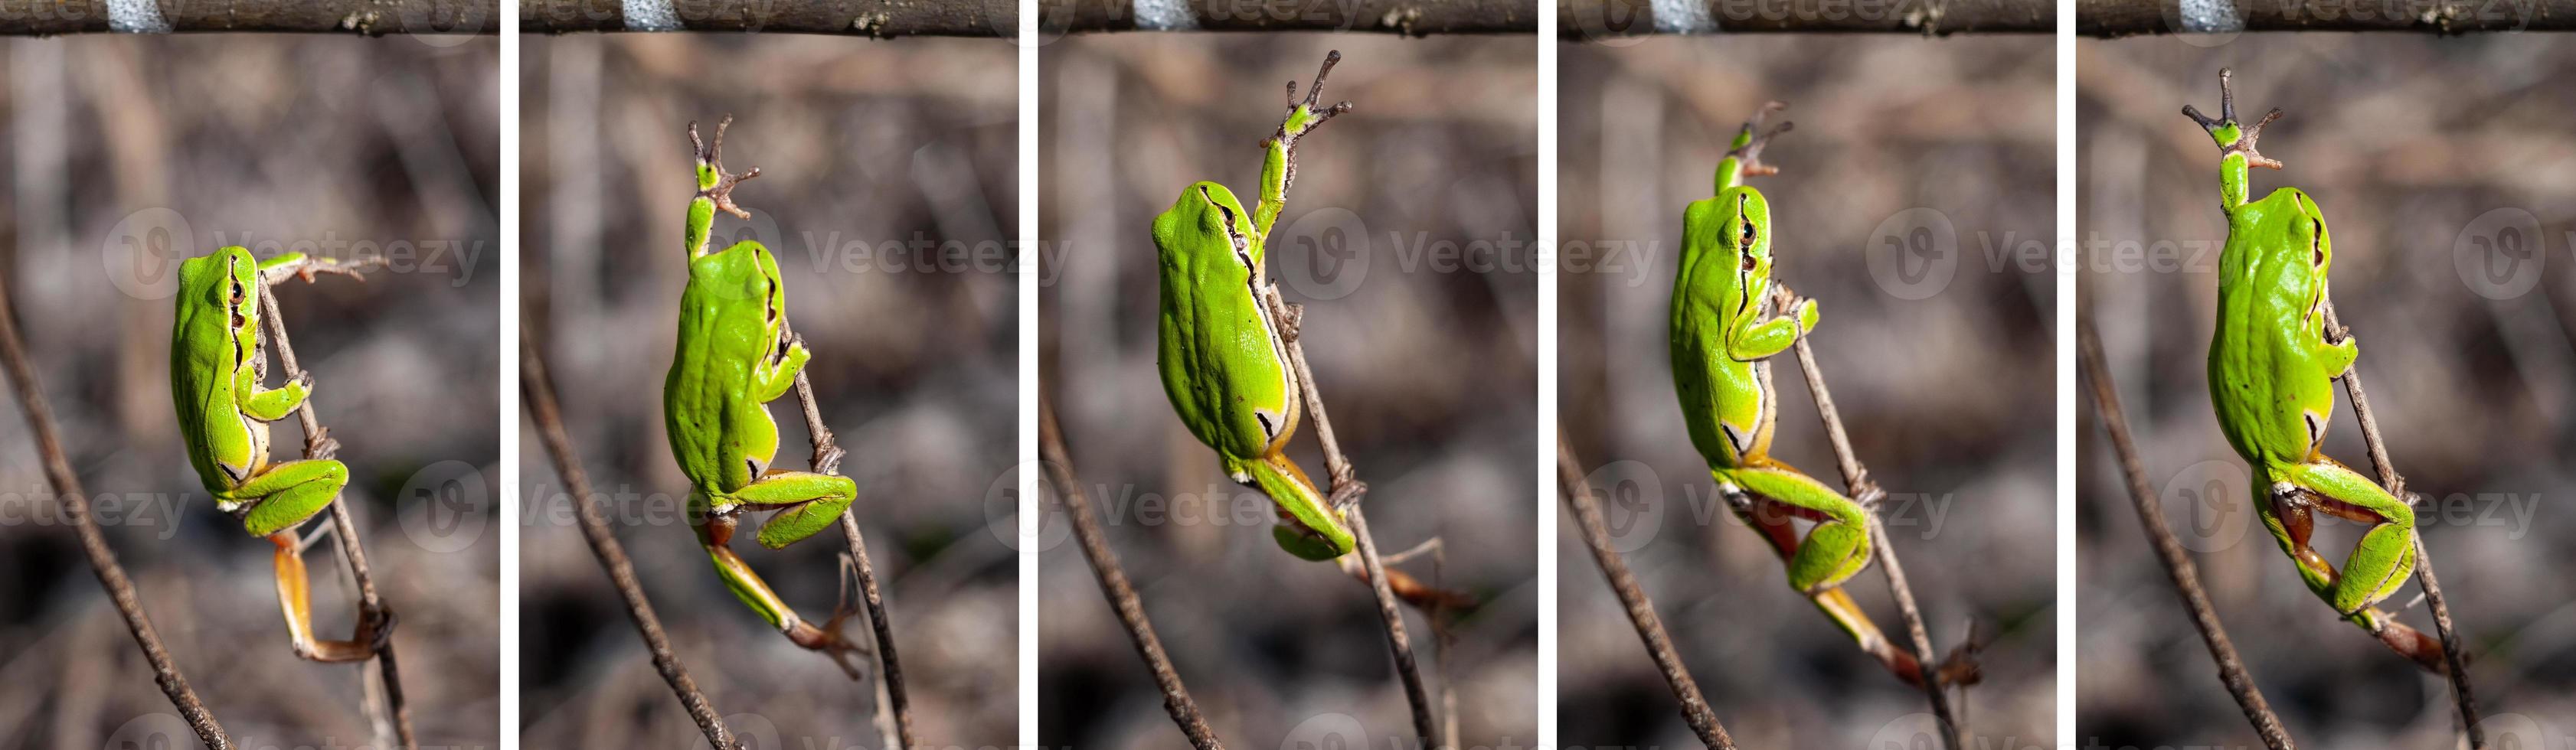 European tree frog reaching for a branch in natural habitat, small tree frog in the woods, collage step by step. Hyla arborea photo